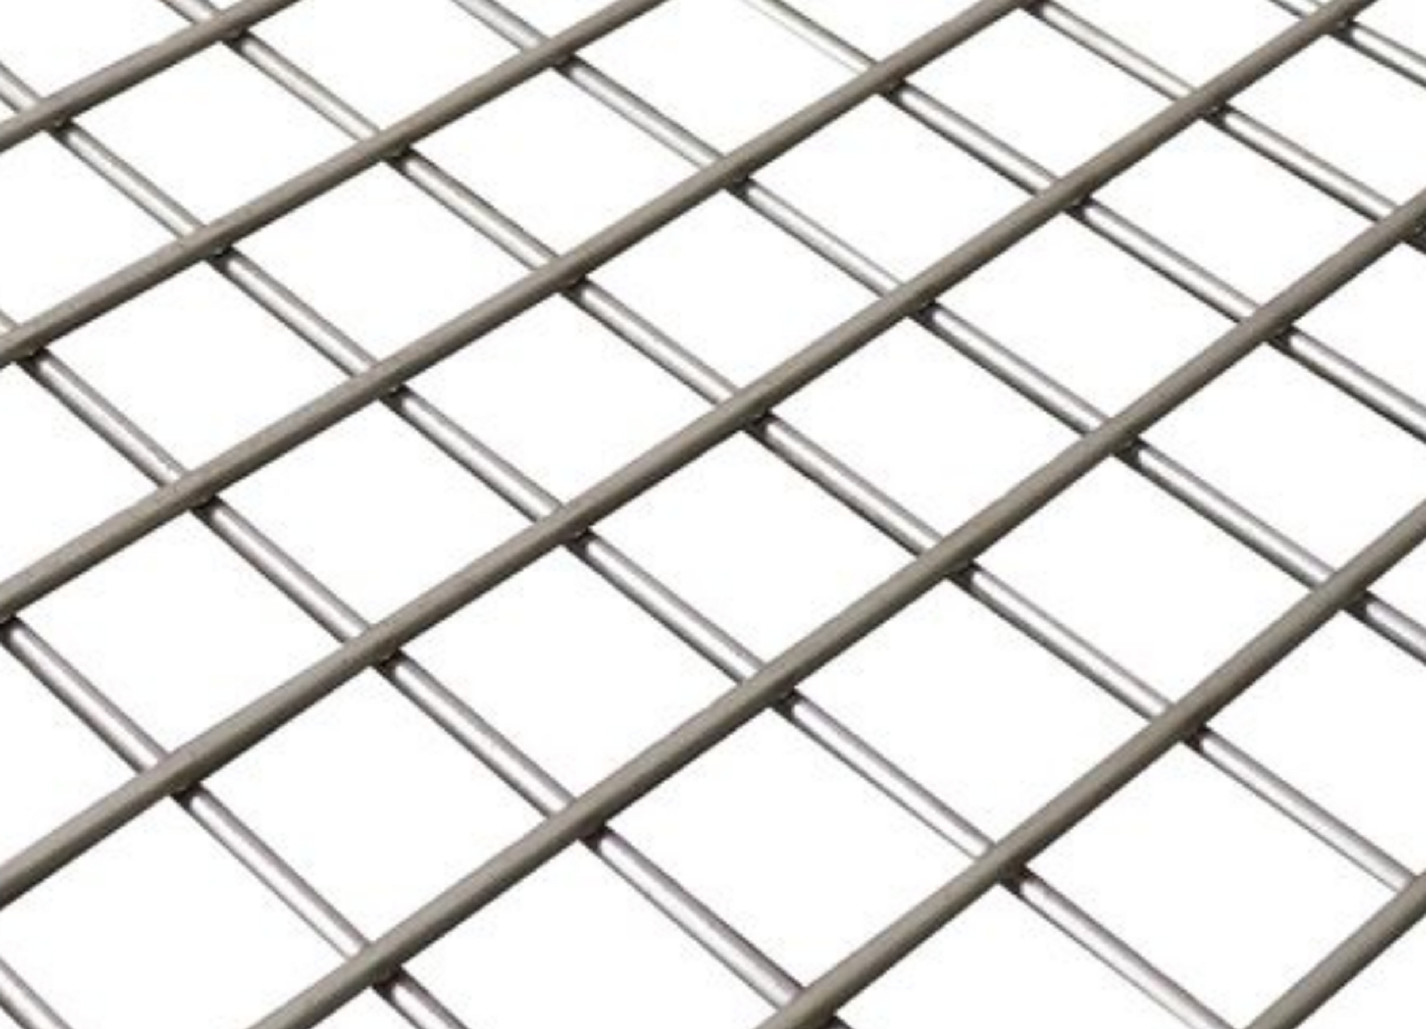 China 16 Gauge Welded Stainless Steel Wire Mesh 6x6 1 X 1 on sale